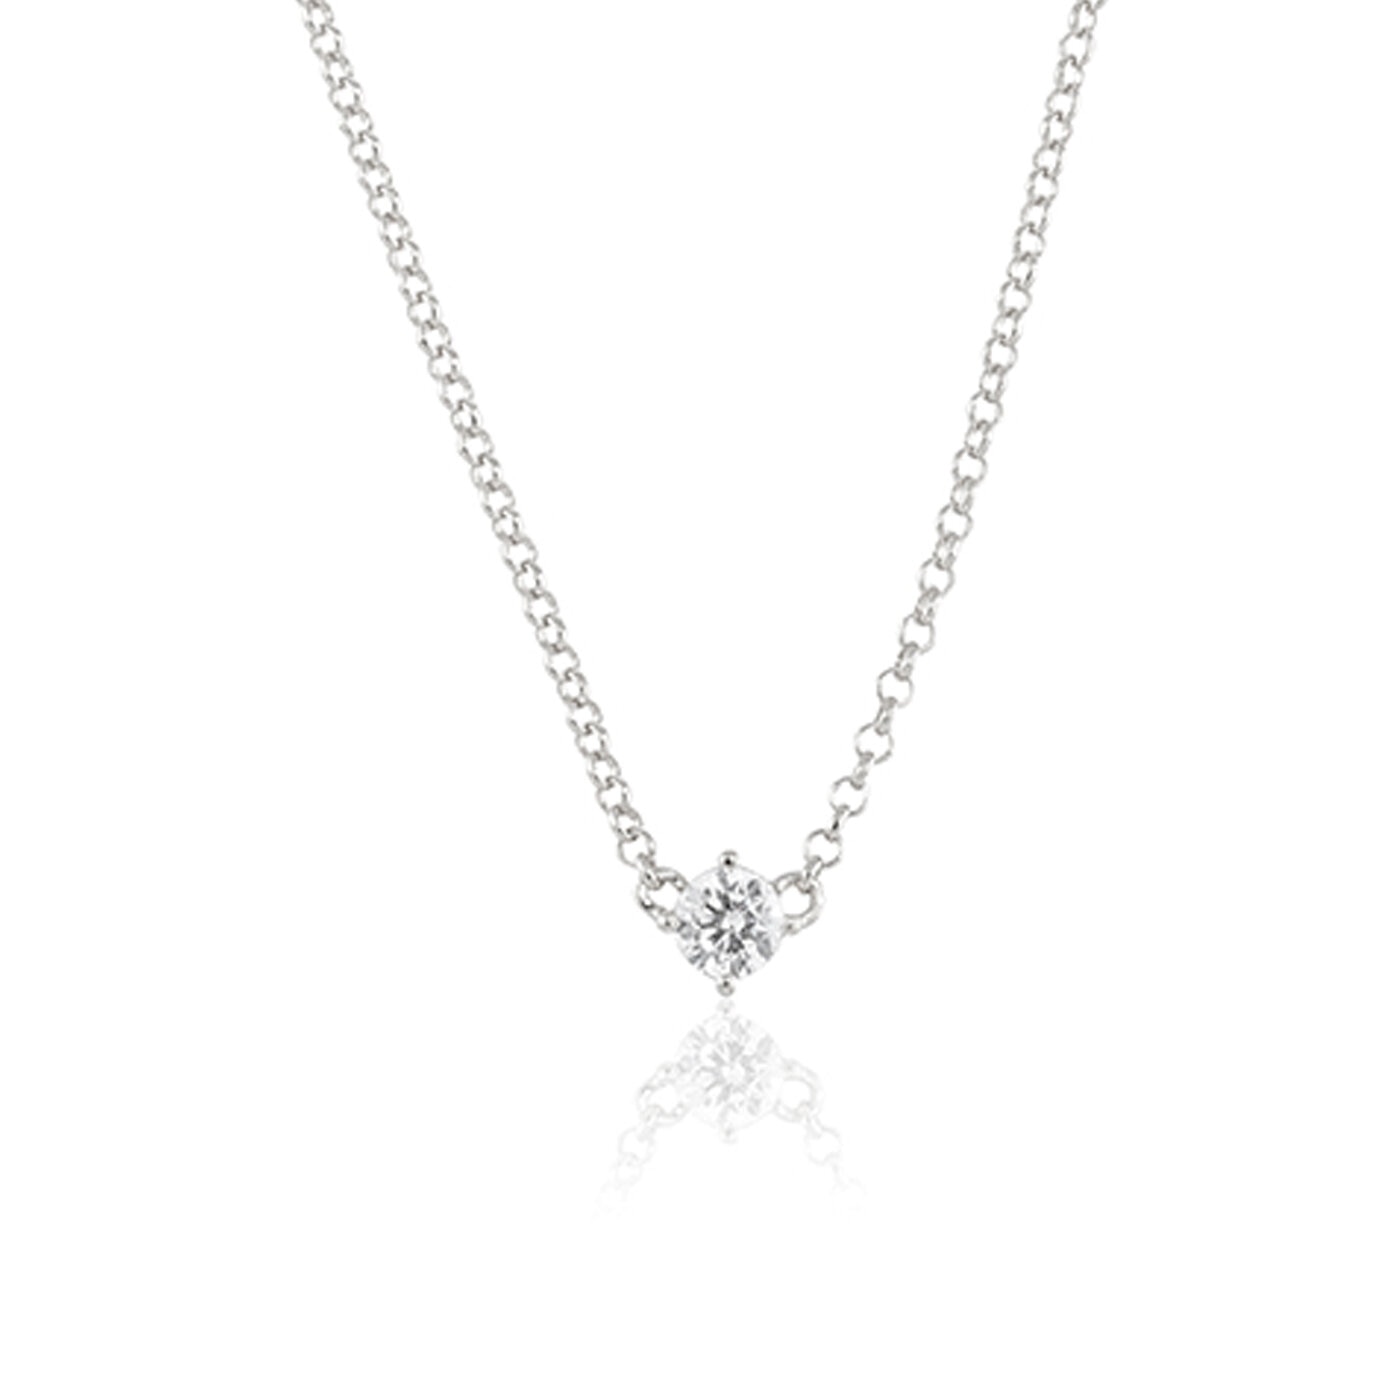 Time to glow mini necklace (silver)